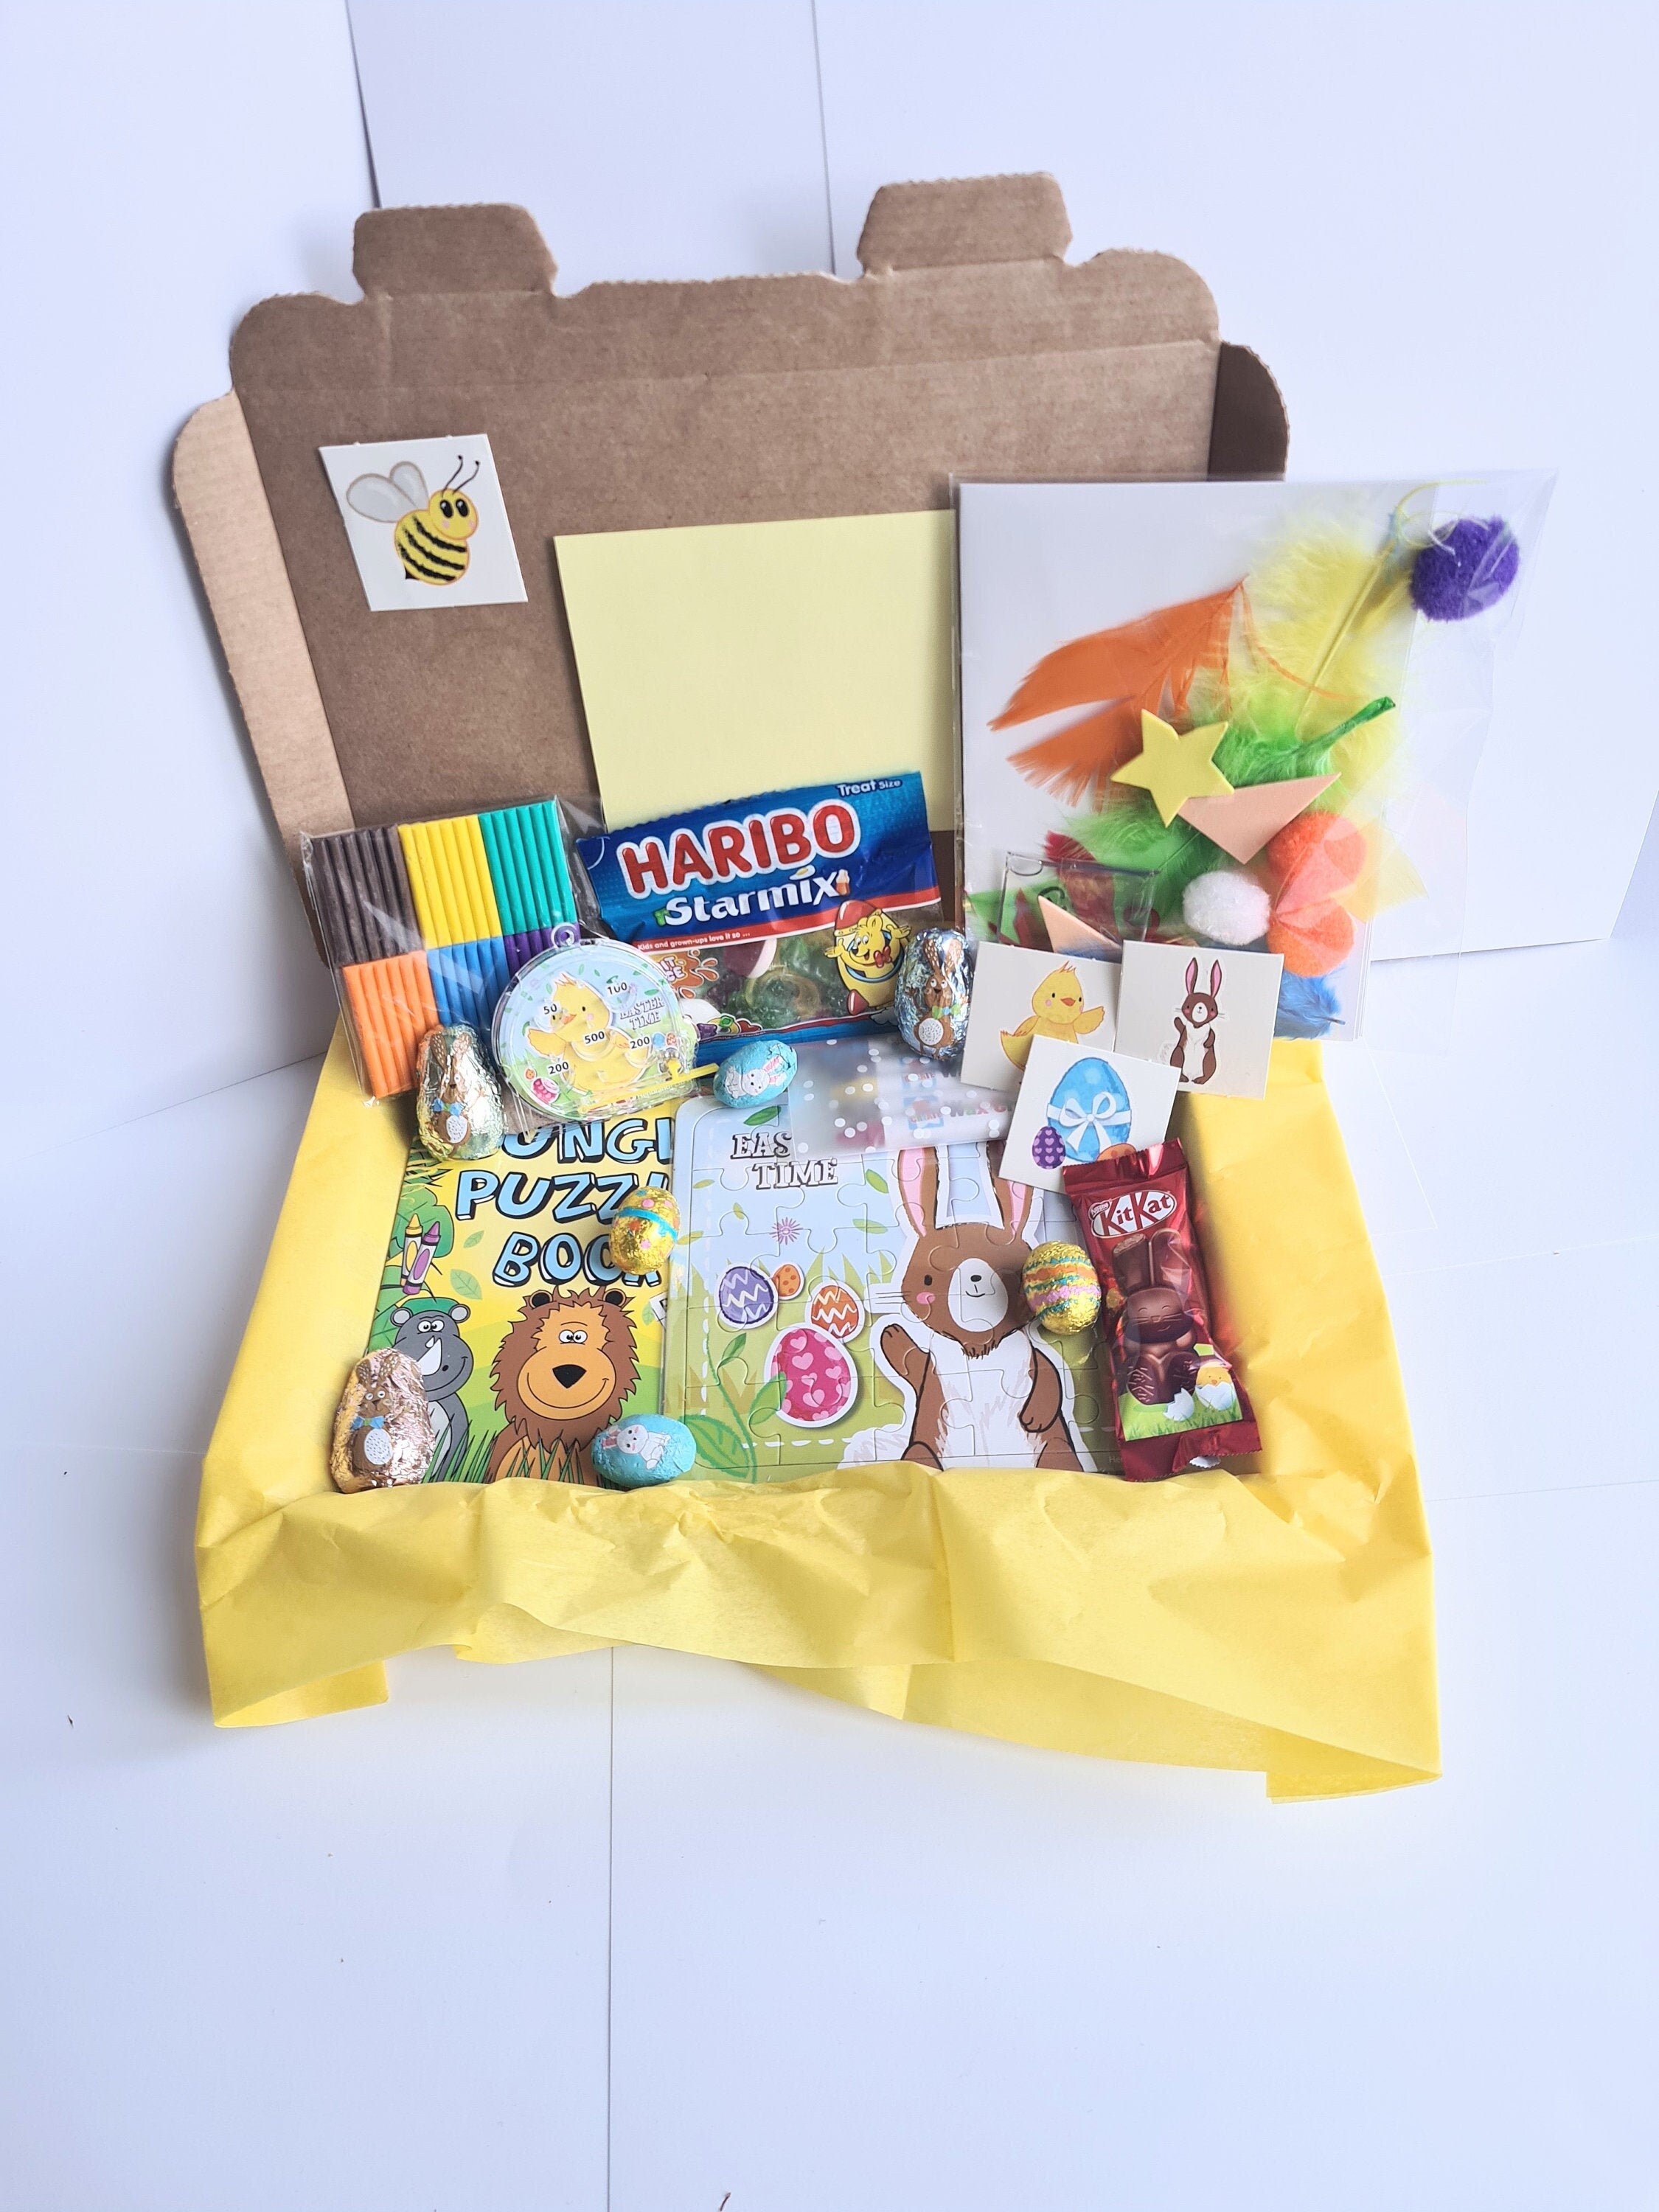  Easter Arts and Crafts for Kids Ages 2-4 Vent Box Decompression  Popular Gift Box Toy Set Easter Surprise Easter Arts and Crafts for Kids  Ages 2-4 : Toys & Games